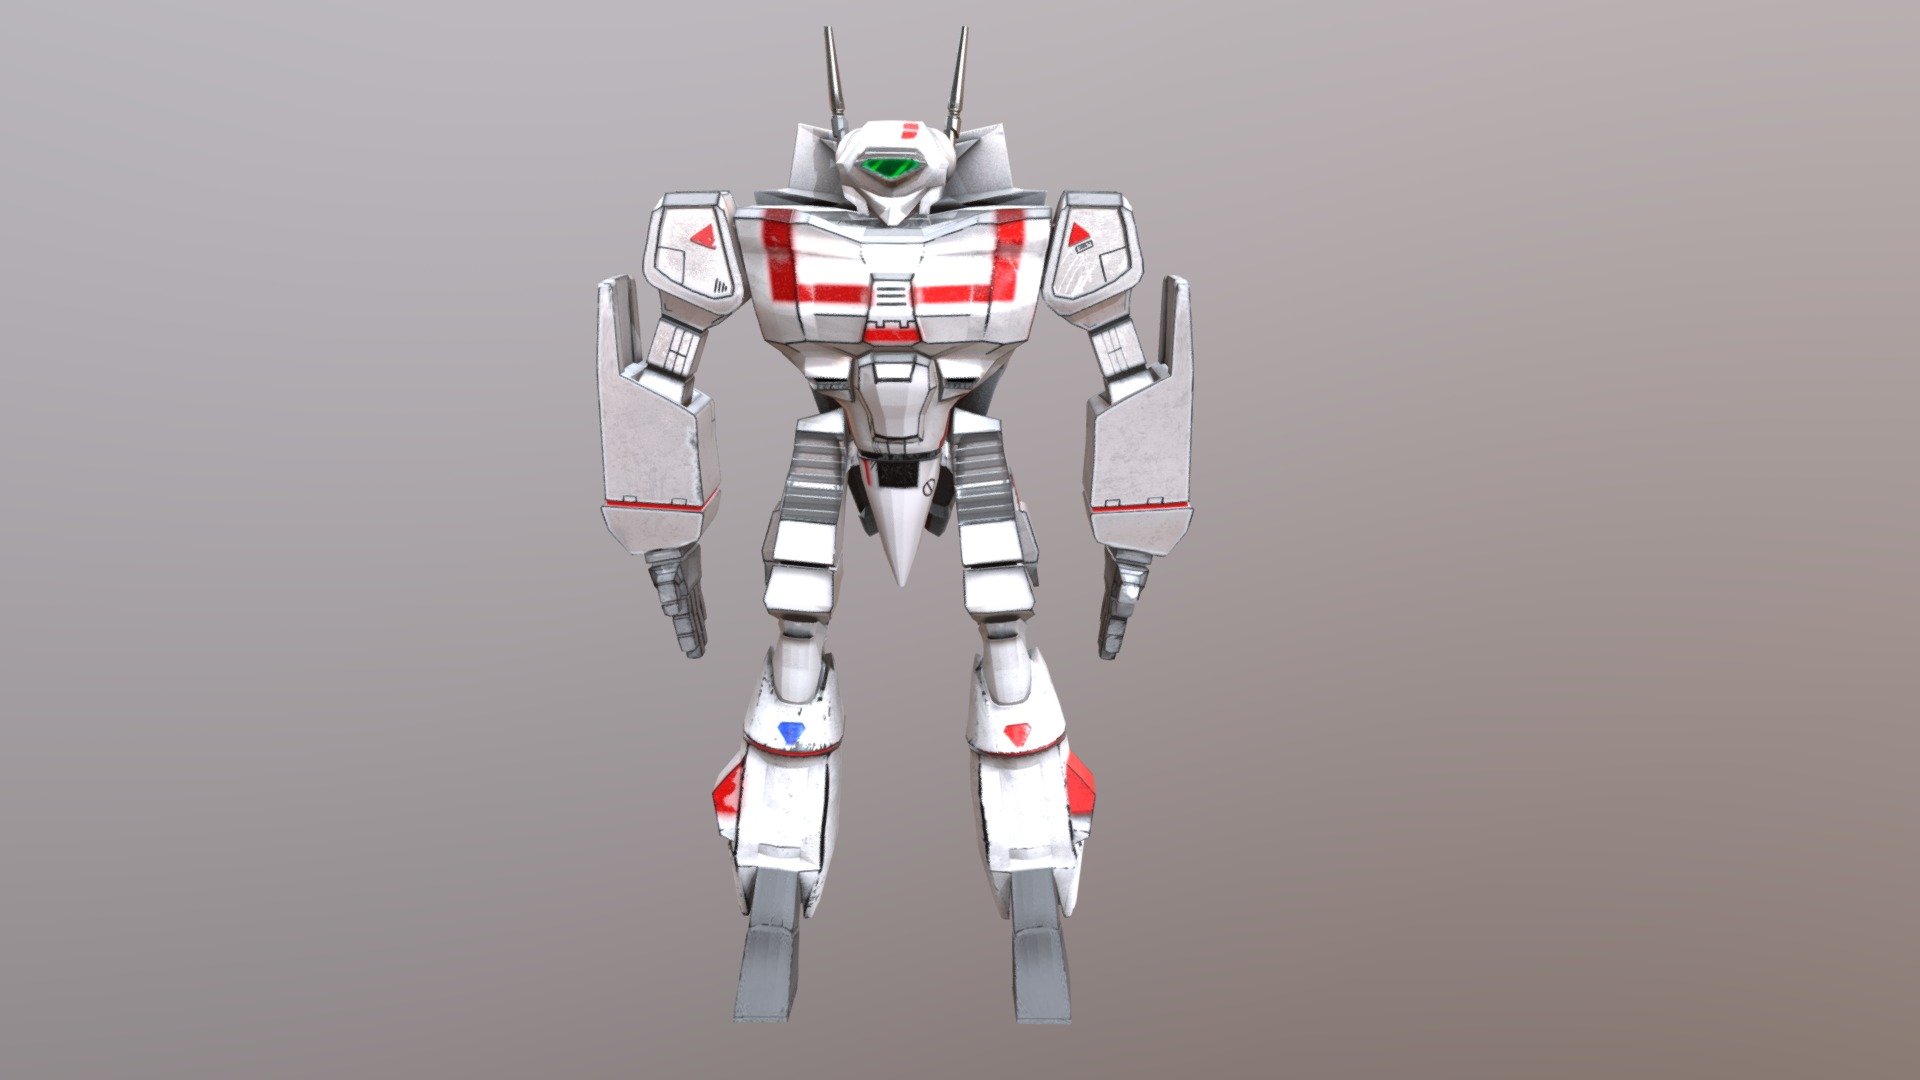 This is a 3D model of a Mecha, that is based on the ones seen in the '80s anime, Robotech. Made to be a profilio piece during my courses at Southern New Hampshire University. First time working with no specific guidelines or restrictions but I tried to stay under 10k polygons. This model has been textured in Substance Painter 3d model